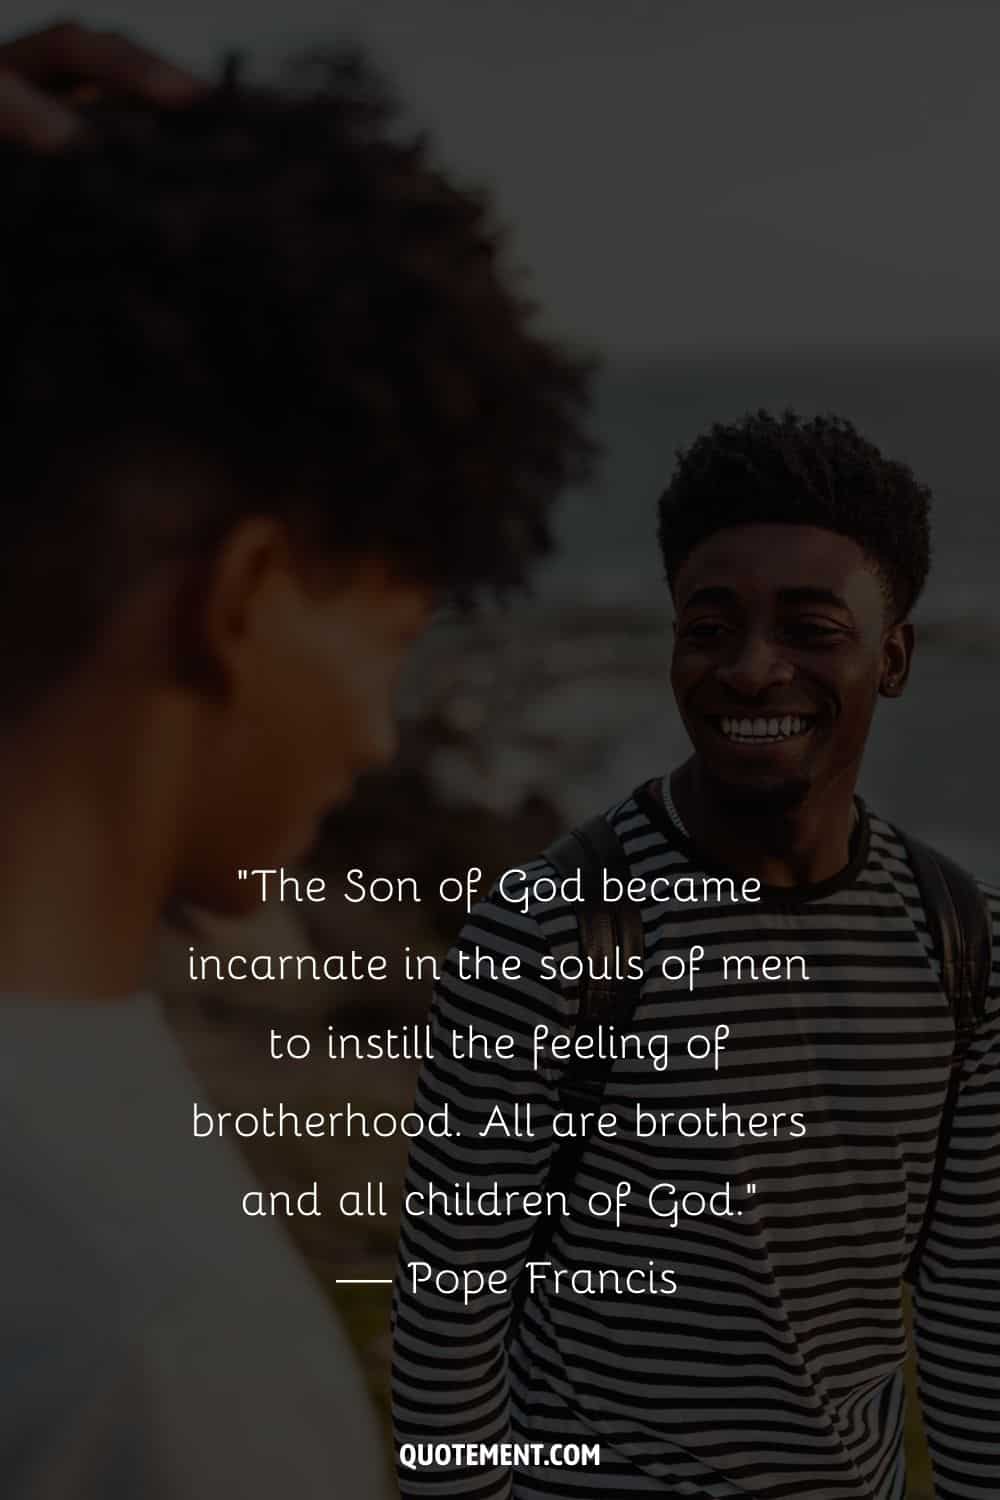 “The Son of God became incarnate in the souls of men to instill the feeling of brotherhood. All are brothers and all children of God.” — Pope Francis